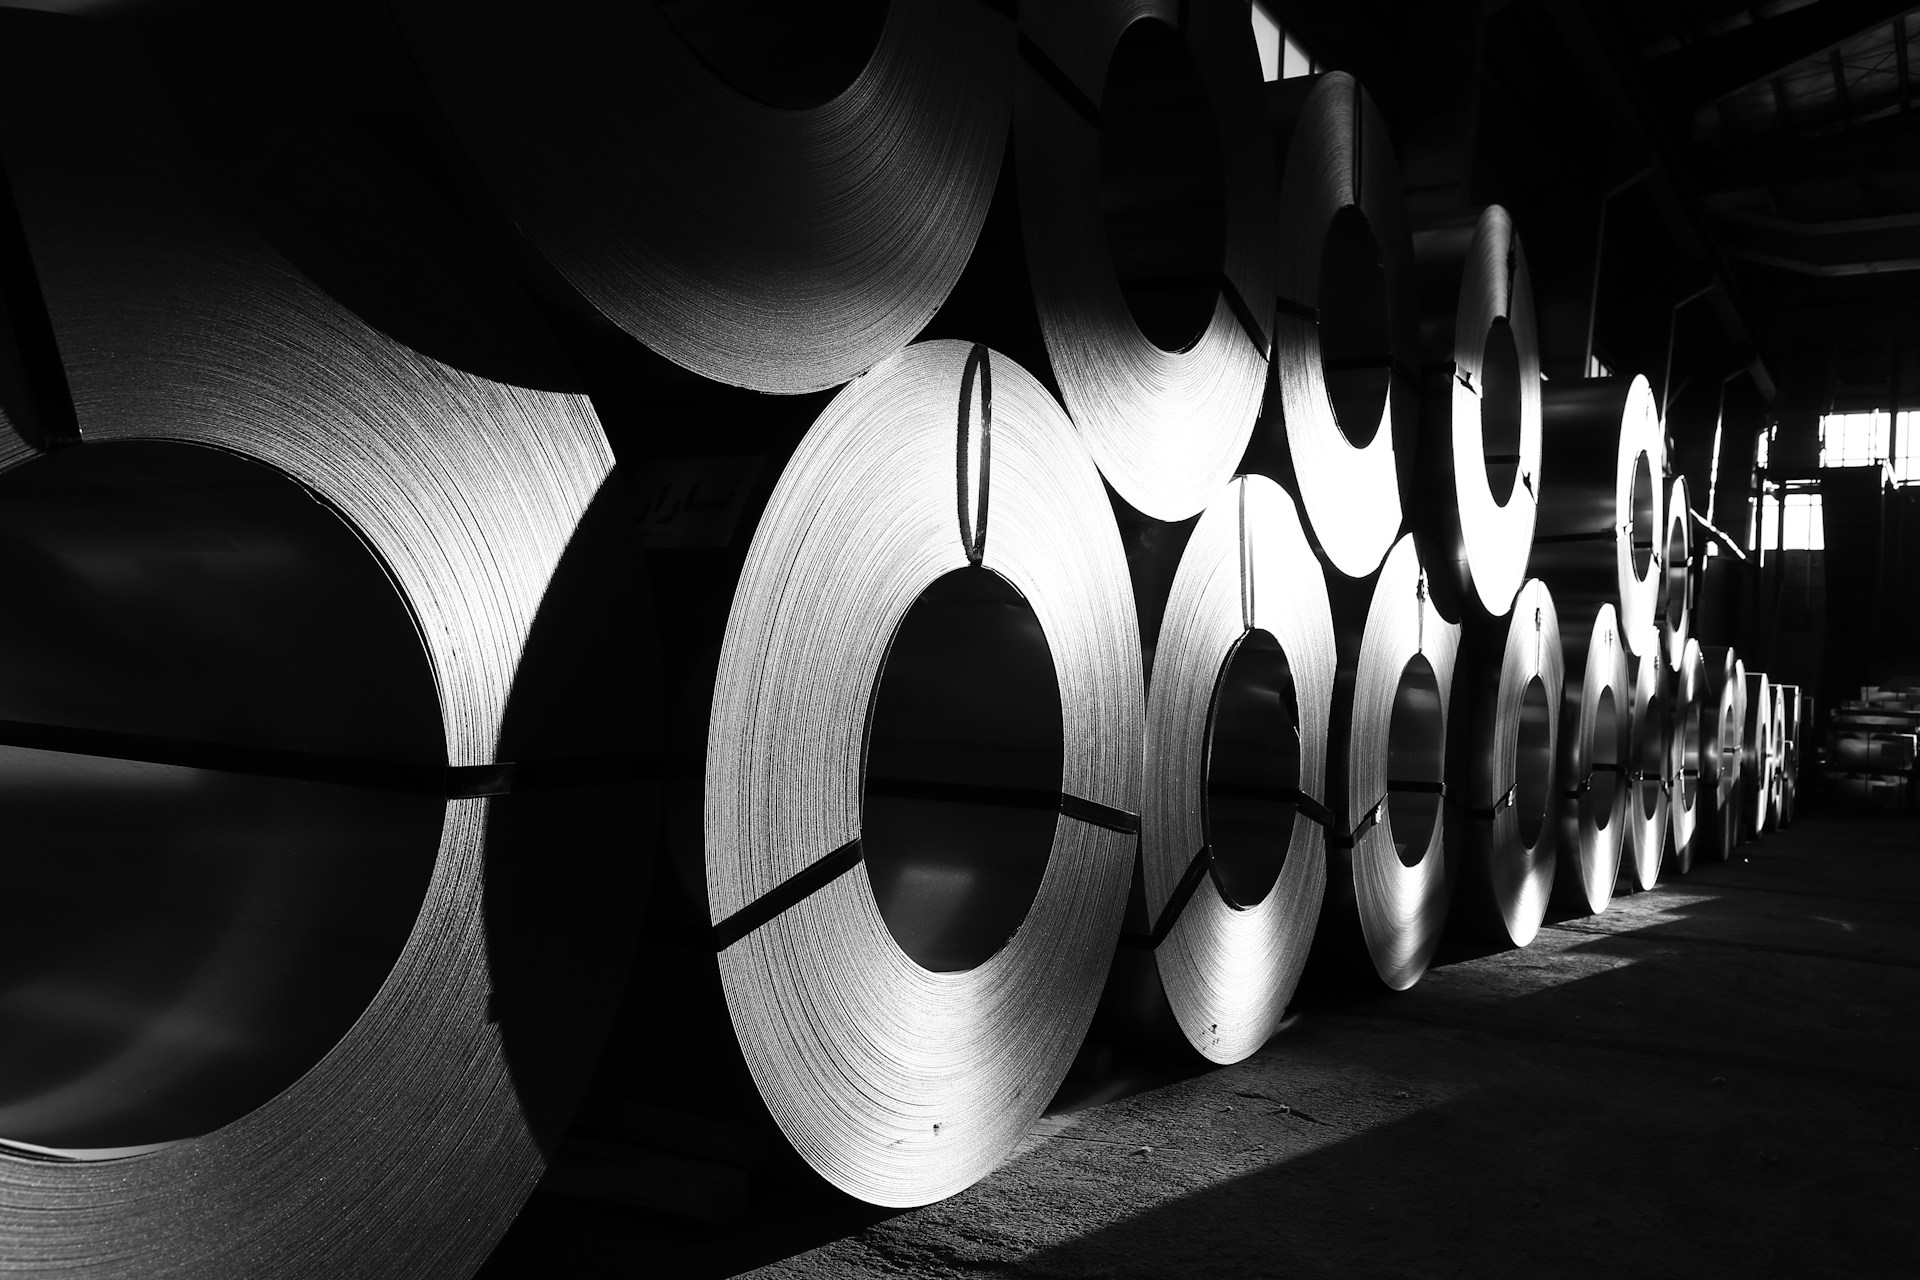 rolls of steel are lined up in a warehouse